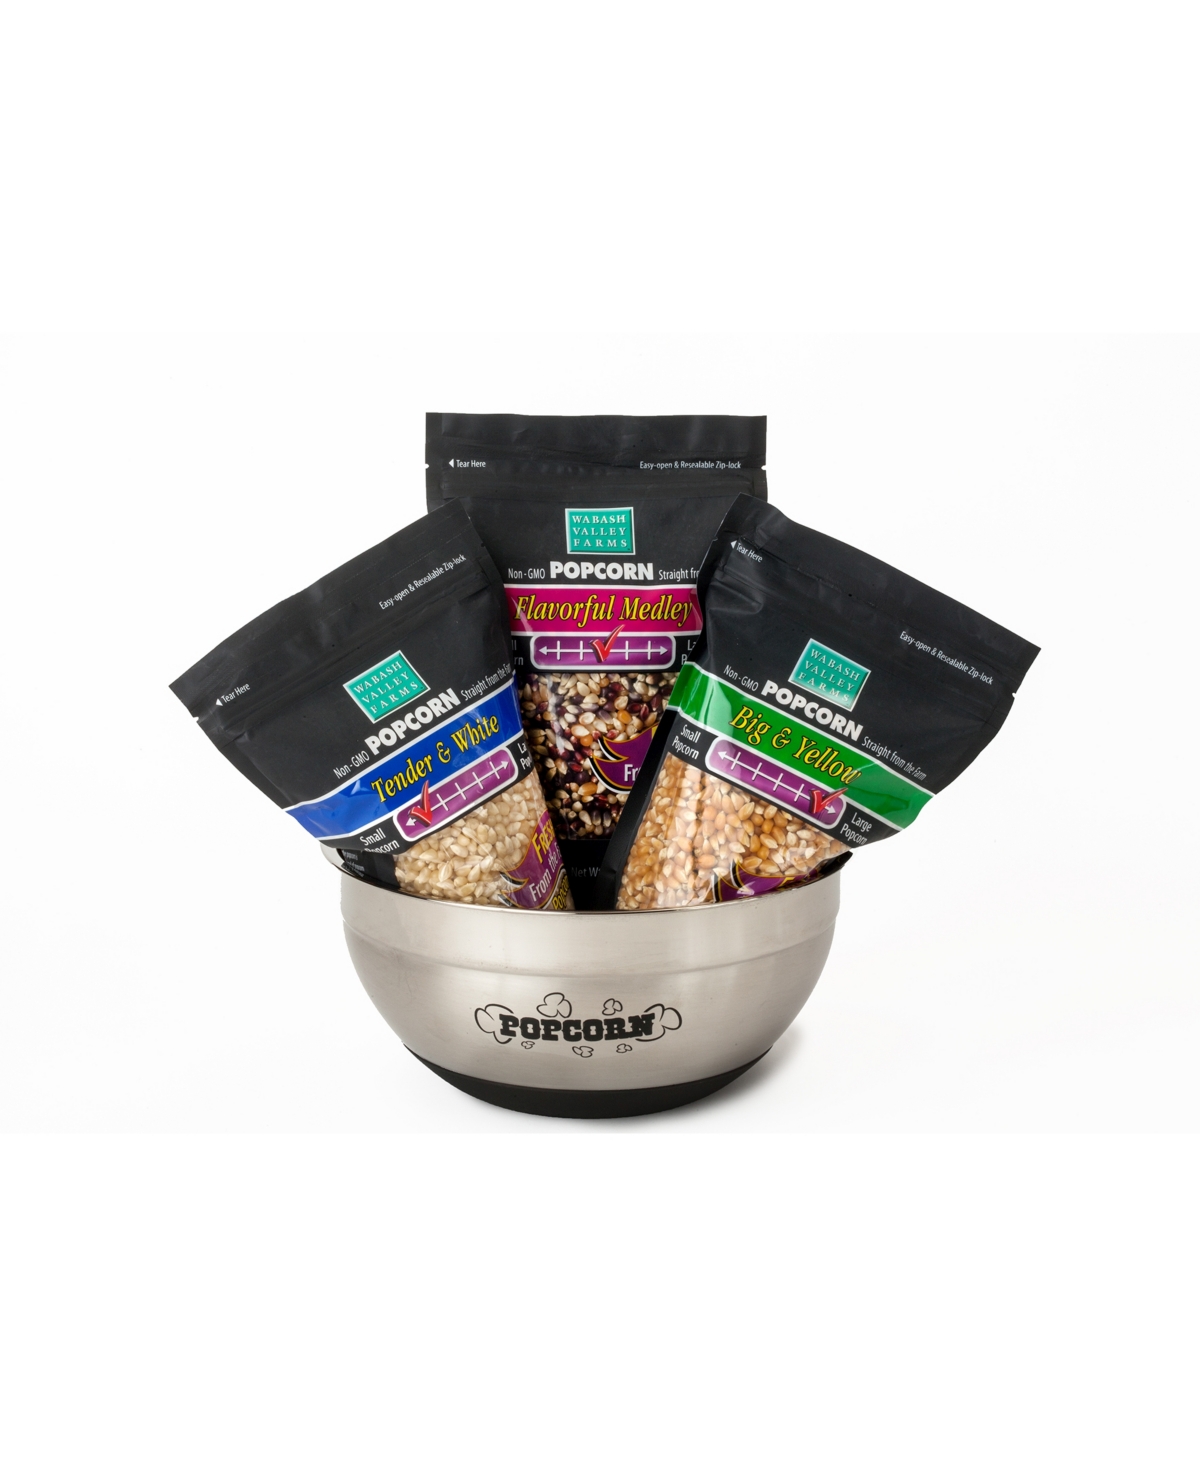 Wabash Valley Farms Gourmet Popcorn Collection Stainless Steel Bowl In Multi